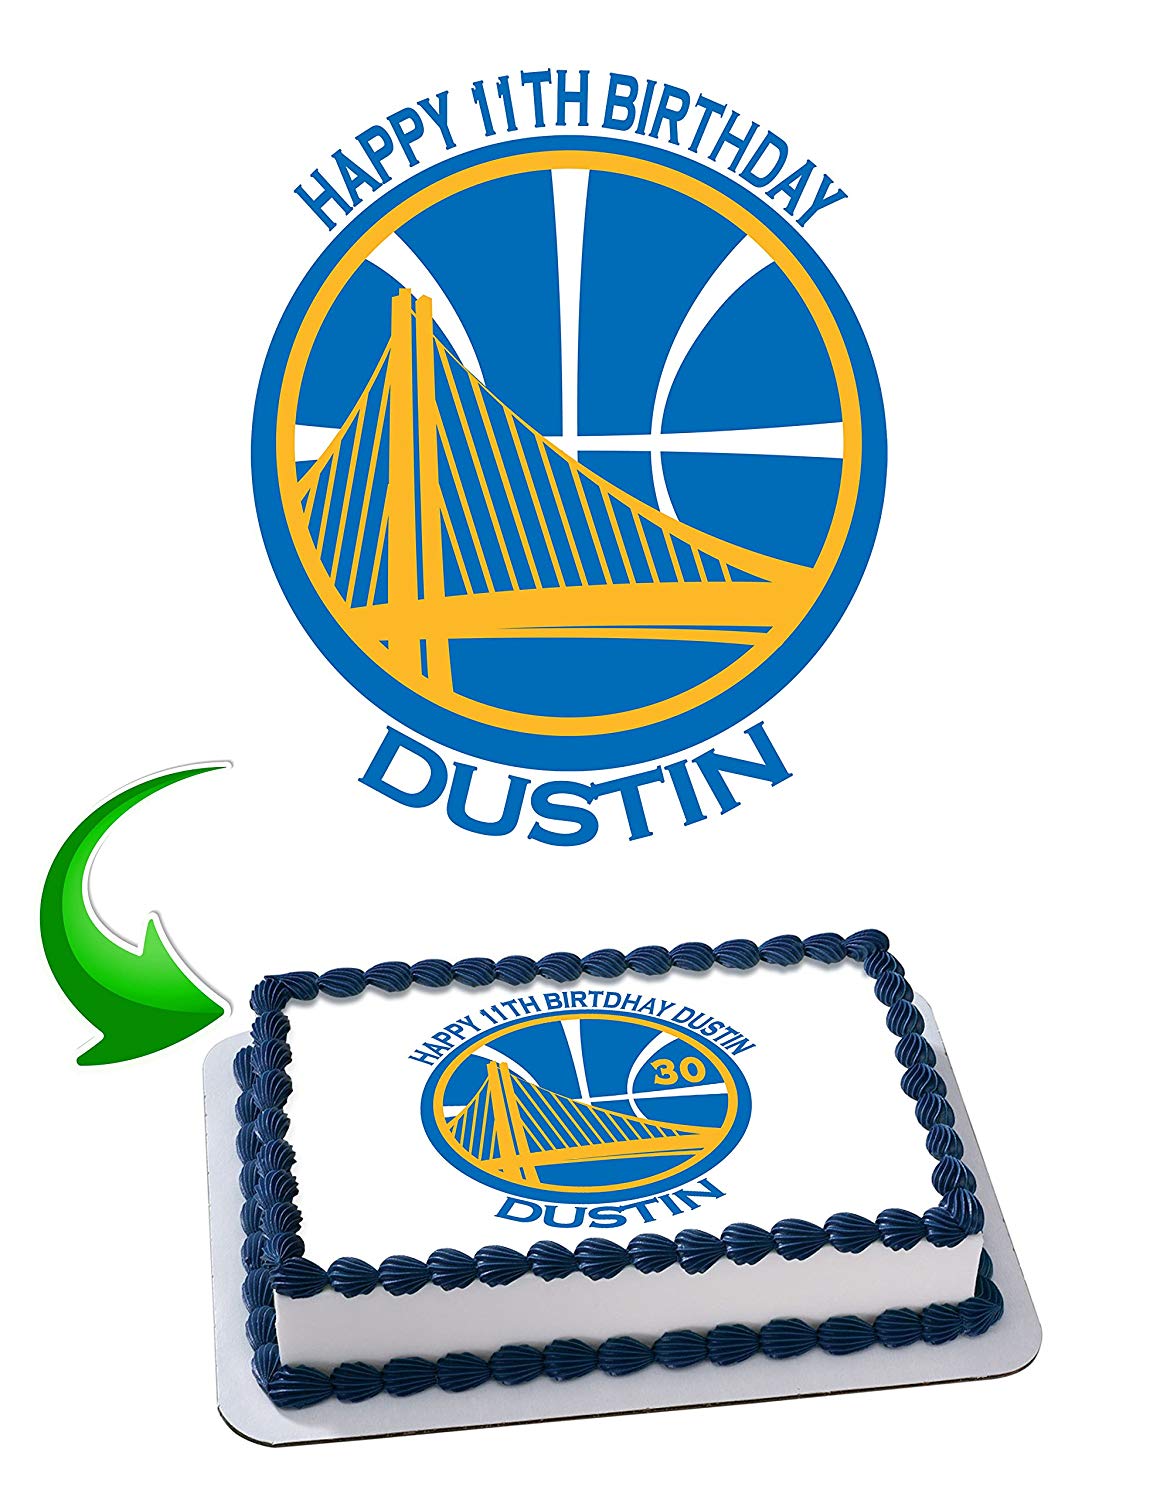 Steph Curry receives Warriors-themed birthday cake